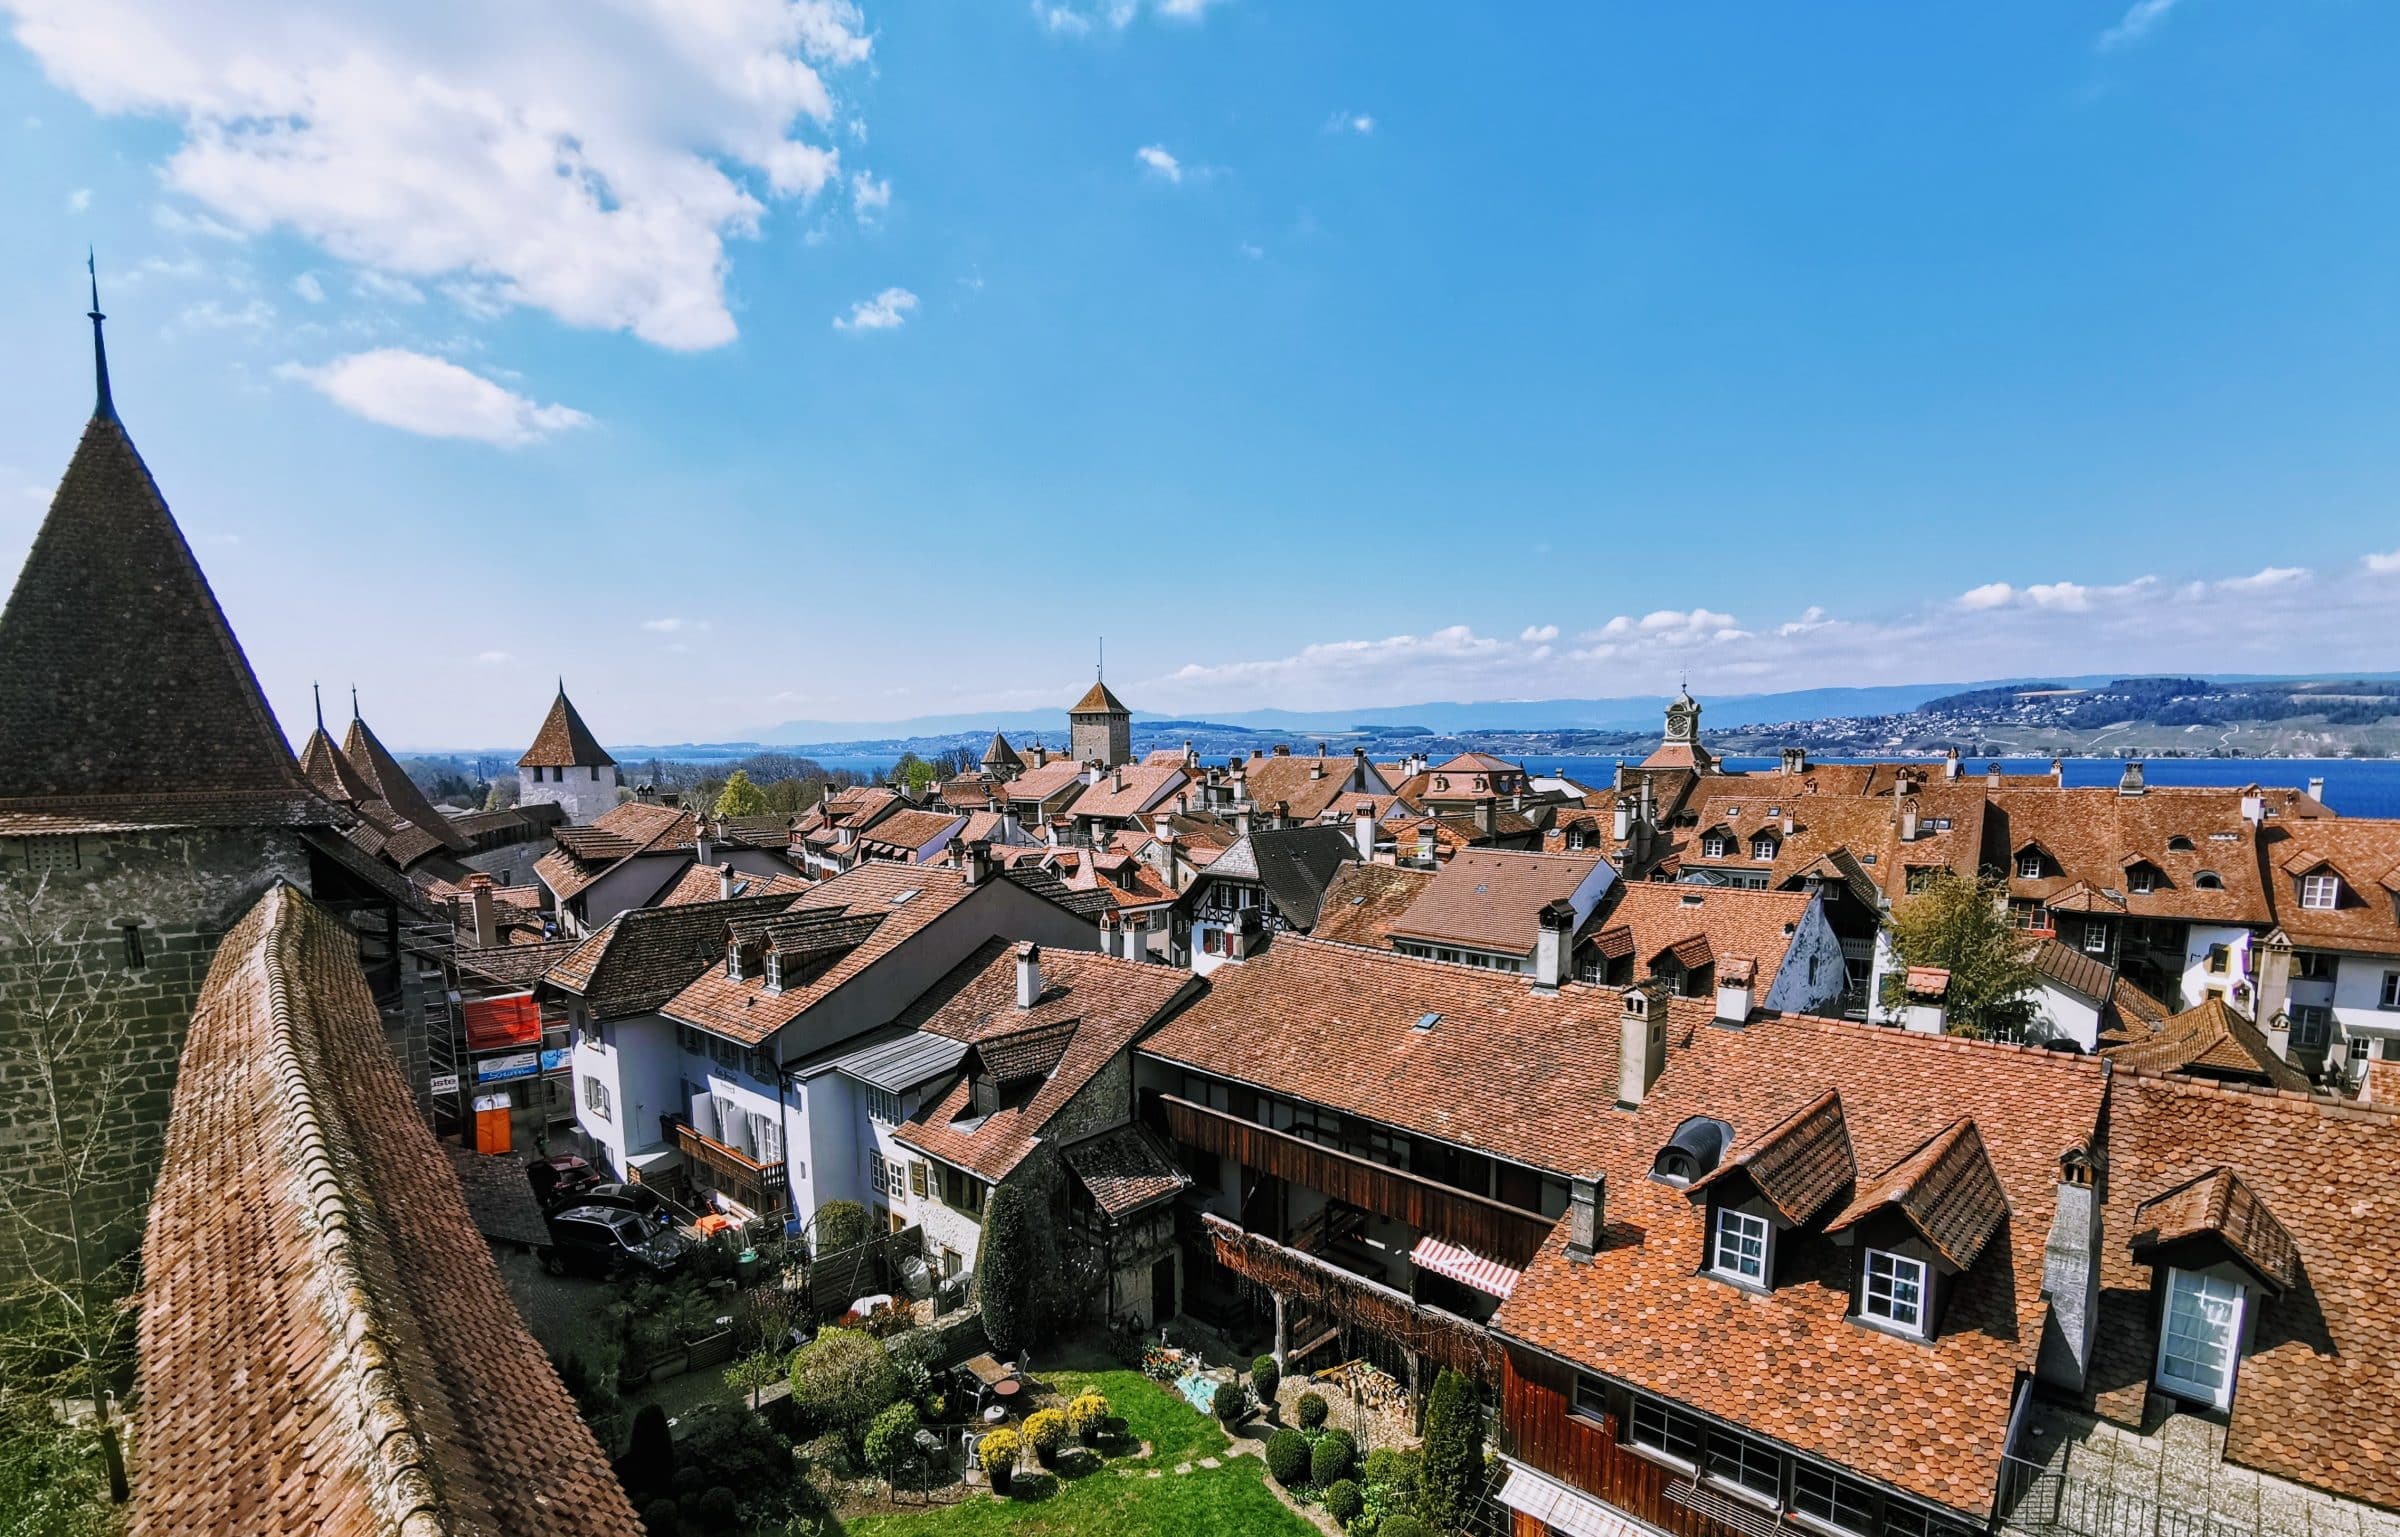 The roofs of Murten and the lake in the background